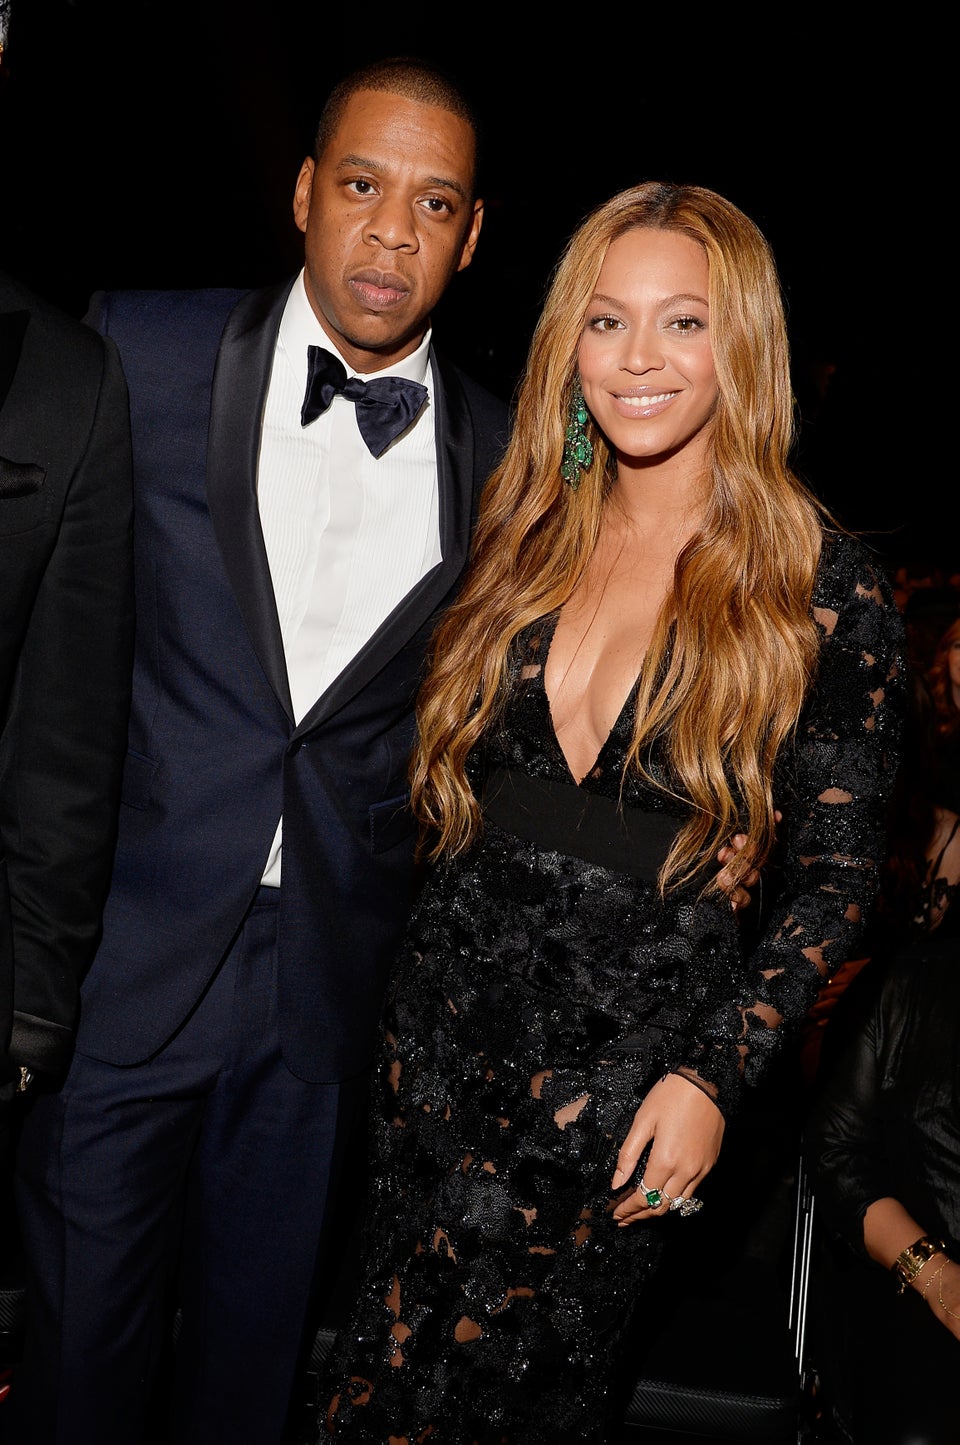 JAY-Z On What He Learned From Cheating: ‘I’m Not The Worst Of What I’ve Done’